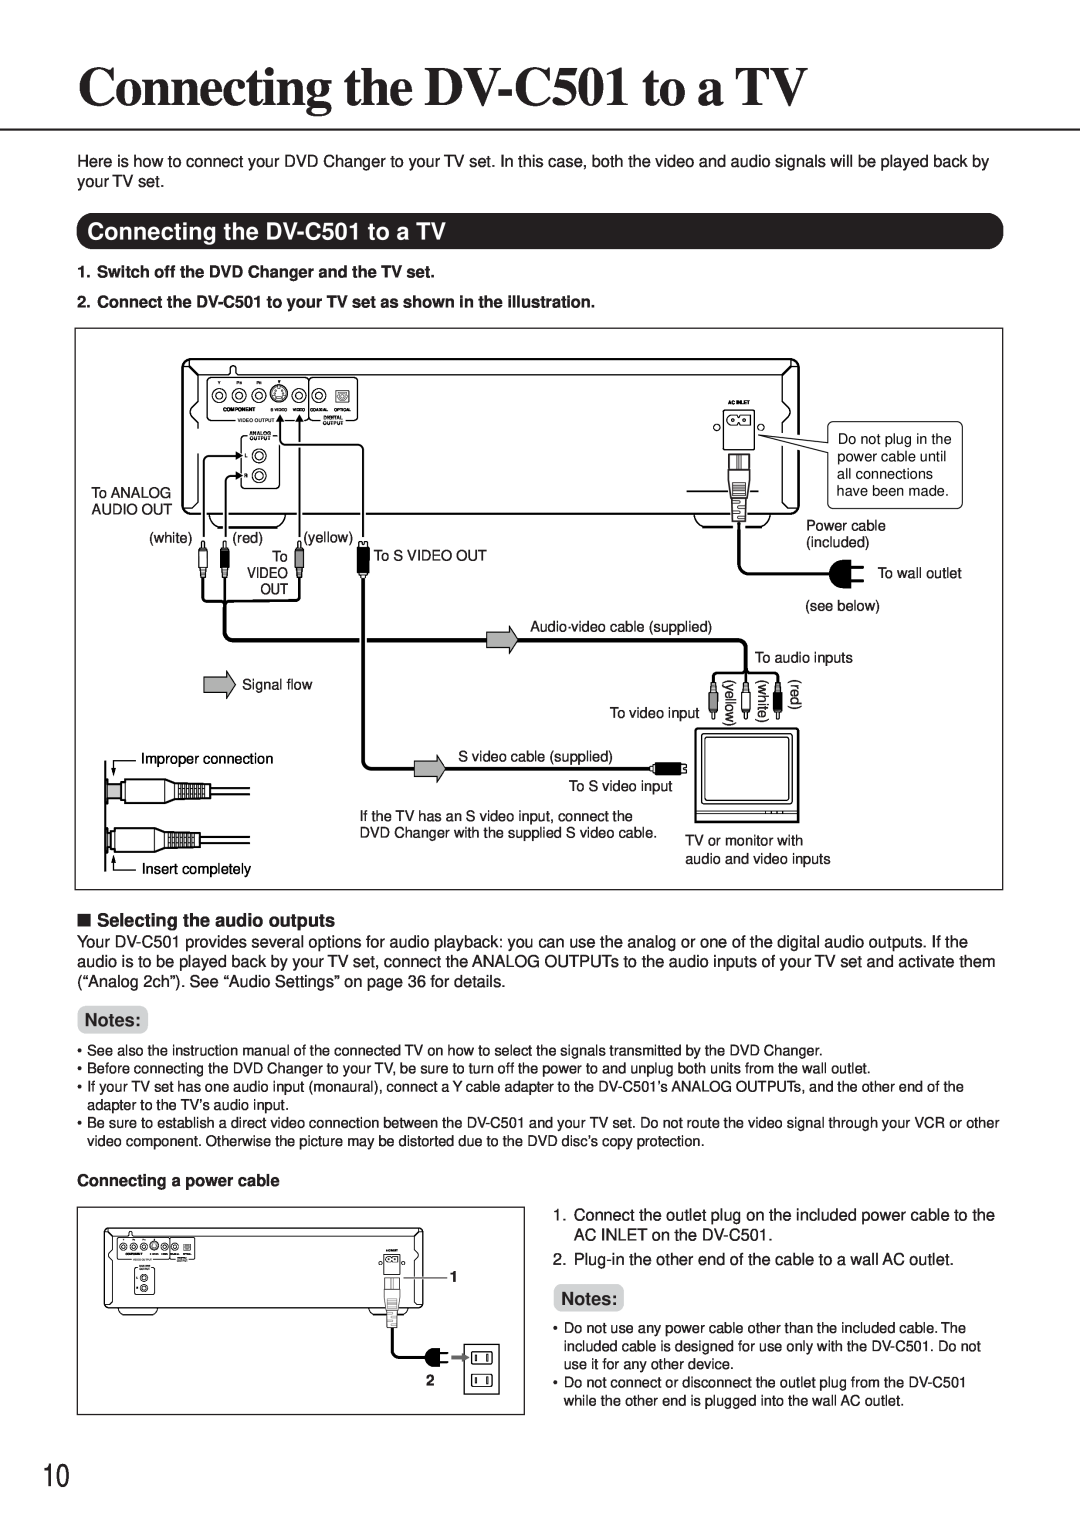 Onkyo instruction manual Connecting the DV-C501to a TV, Selecting the audio outputs 